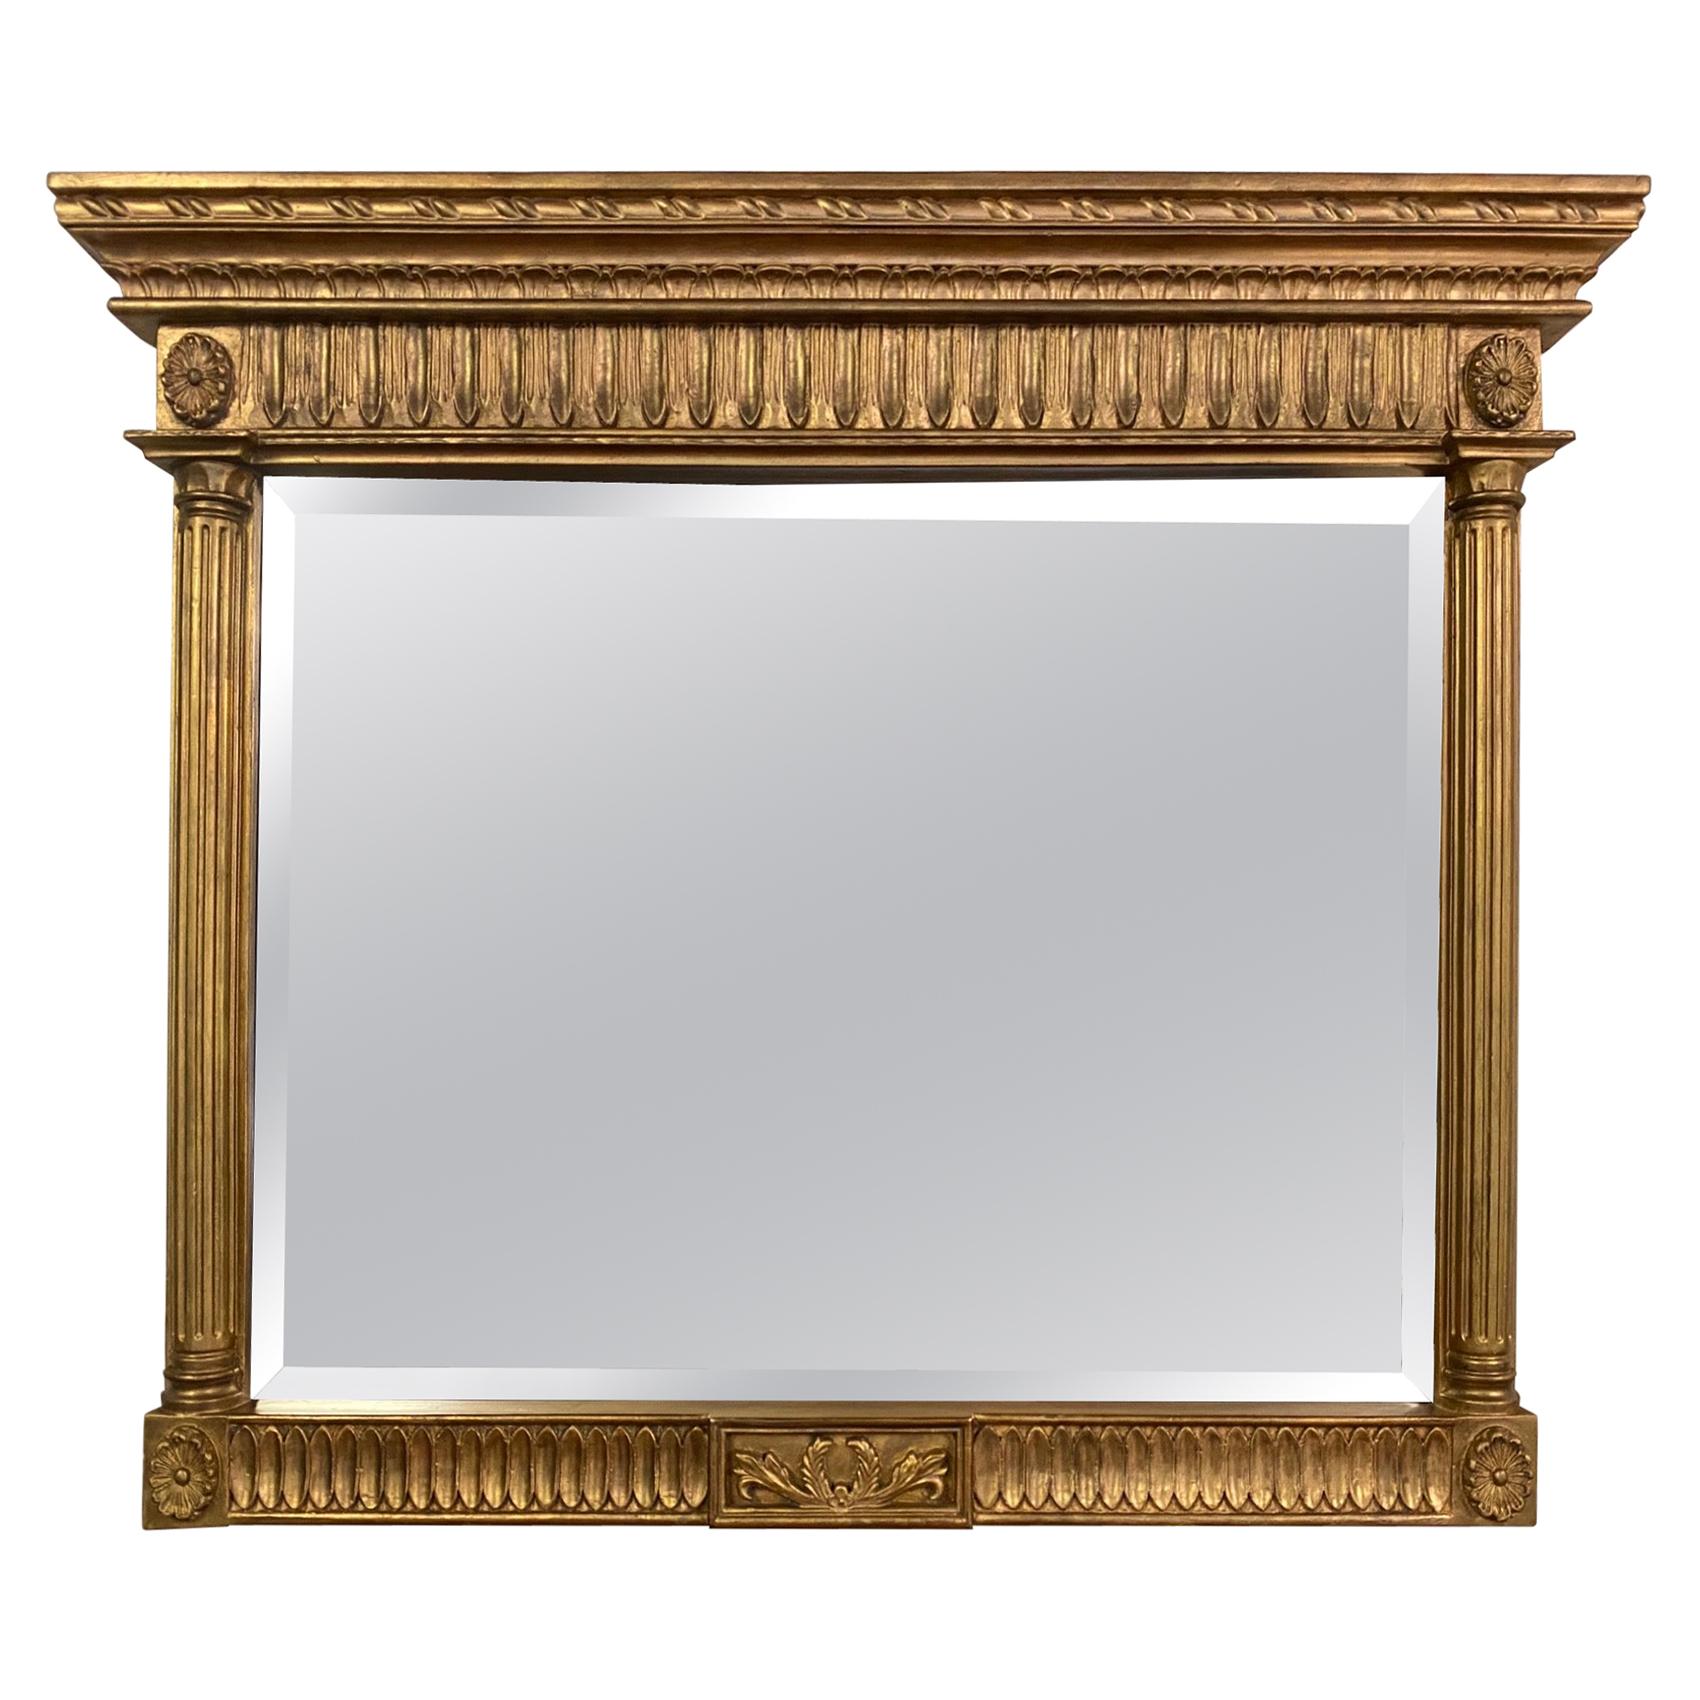 Neoclassical Style Gold Gilt Carved Wood Frame Mirror